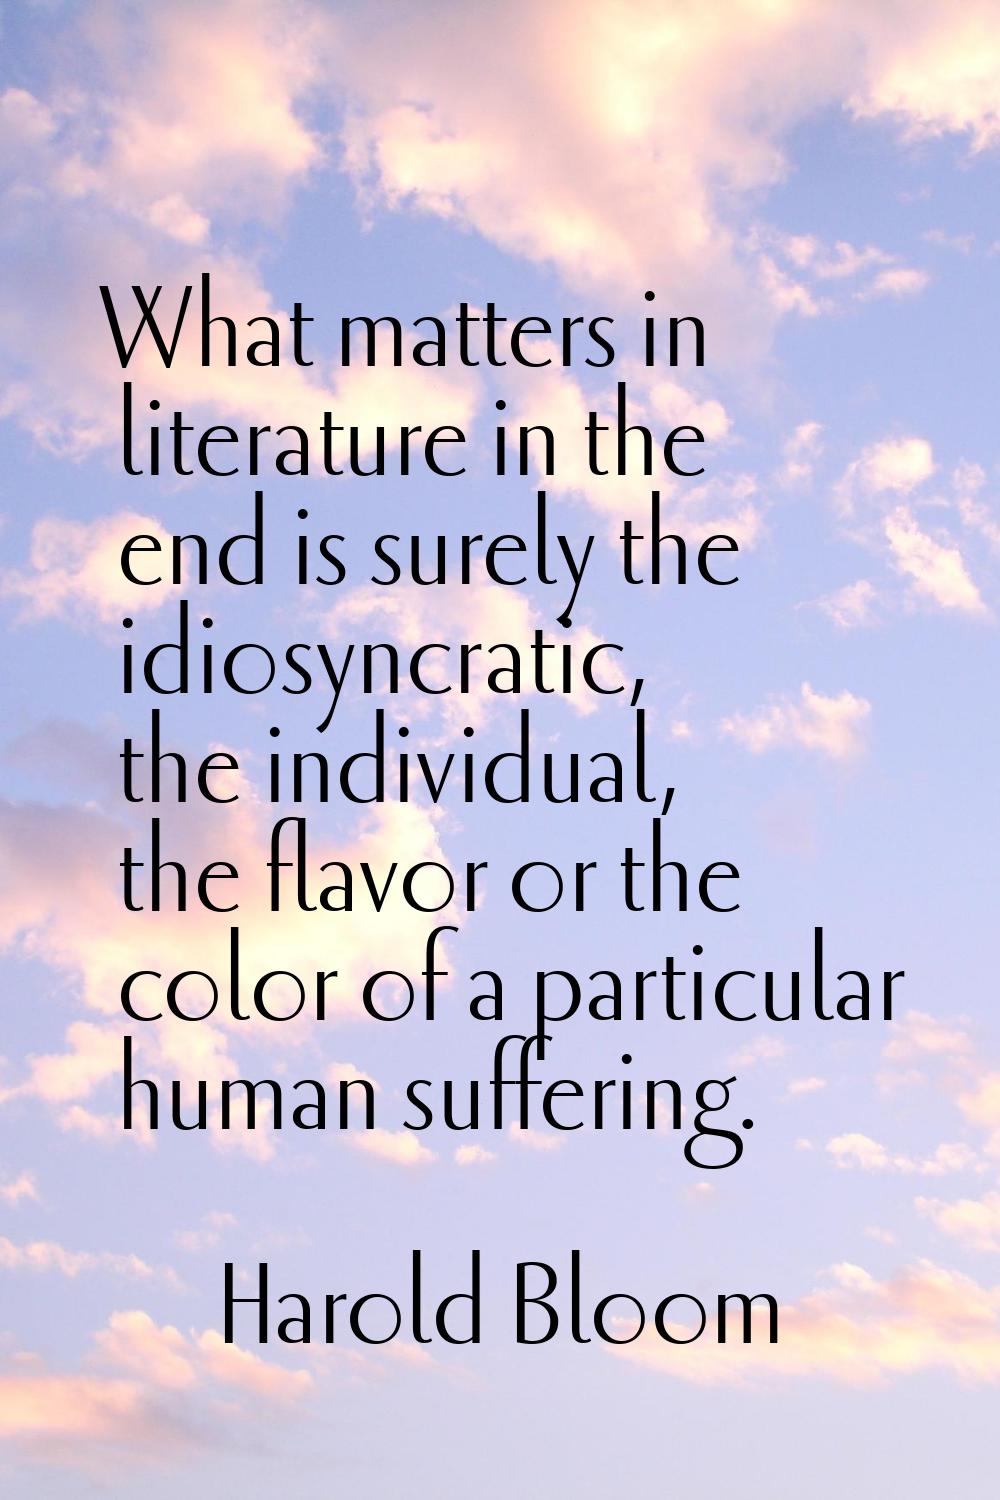 What matters in literature in the end is surely the idiosyncratic, the individual, the flavor or th